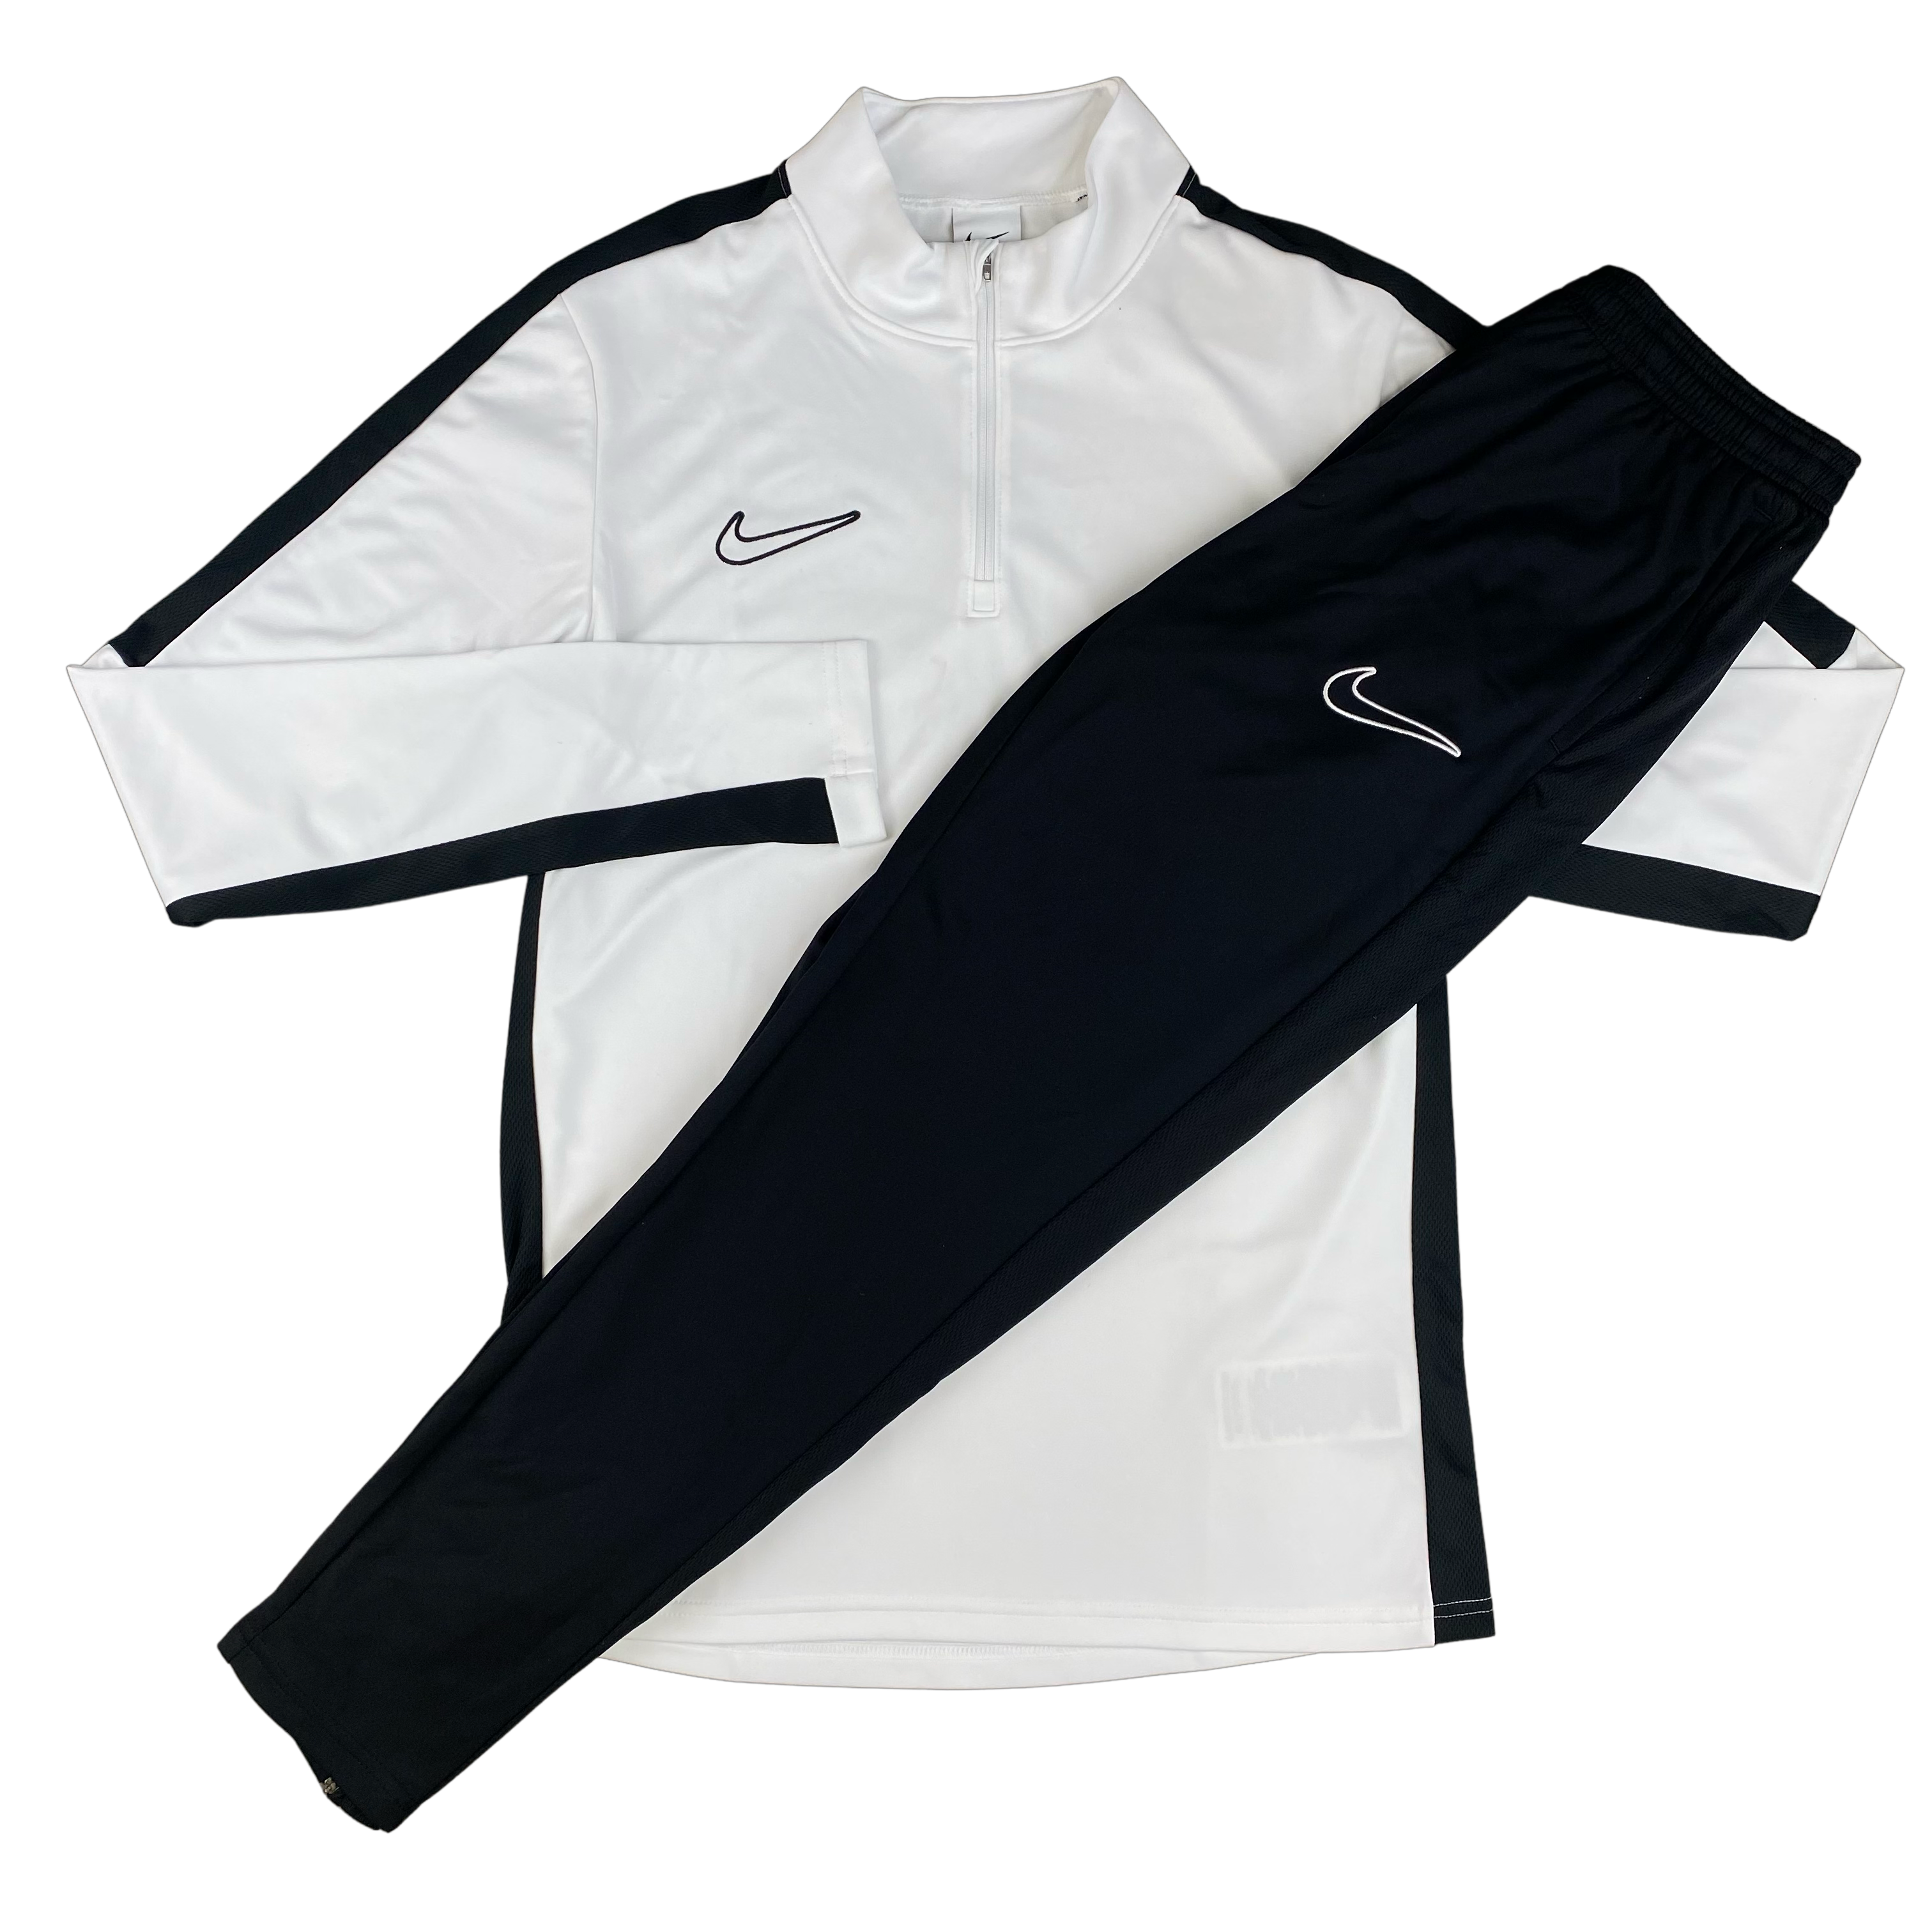 NIKE ACADEMY DRILL TRACKSUIT - WHITE / BLACK